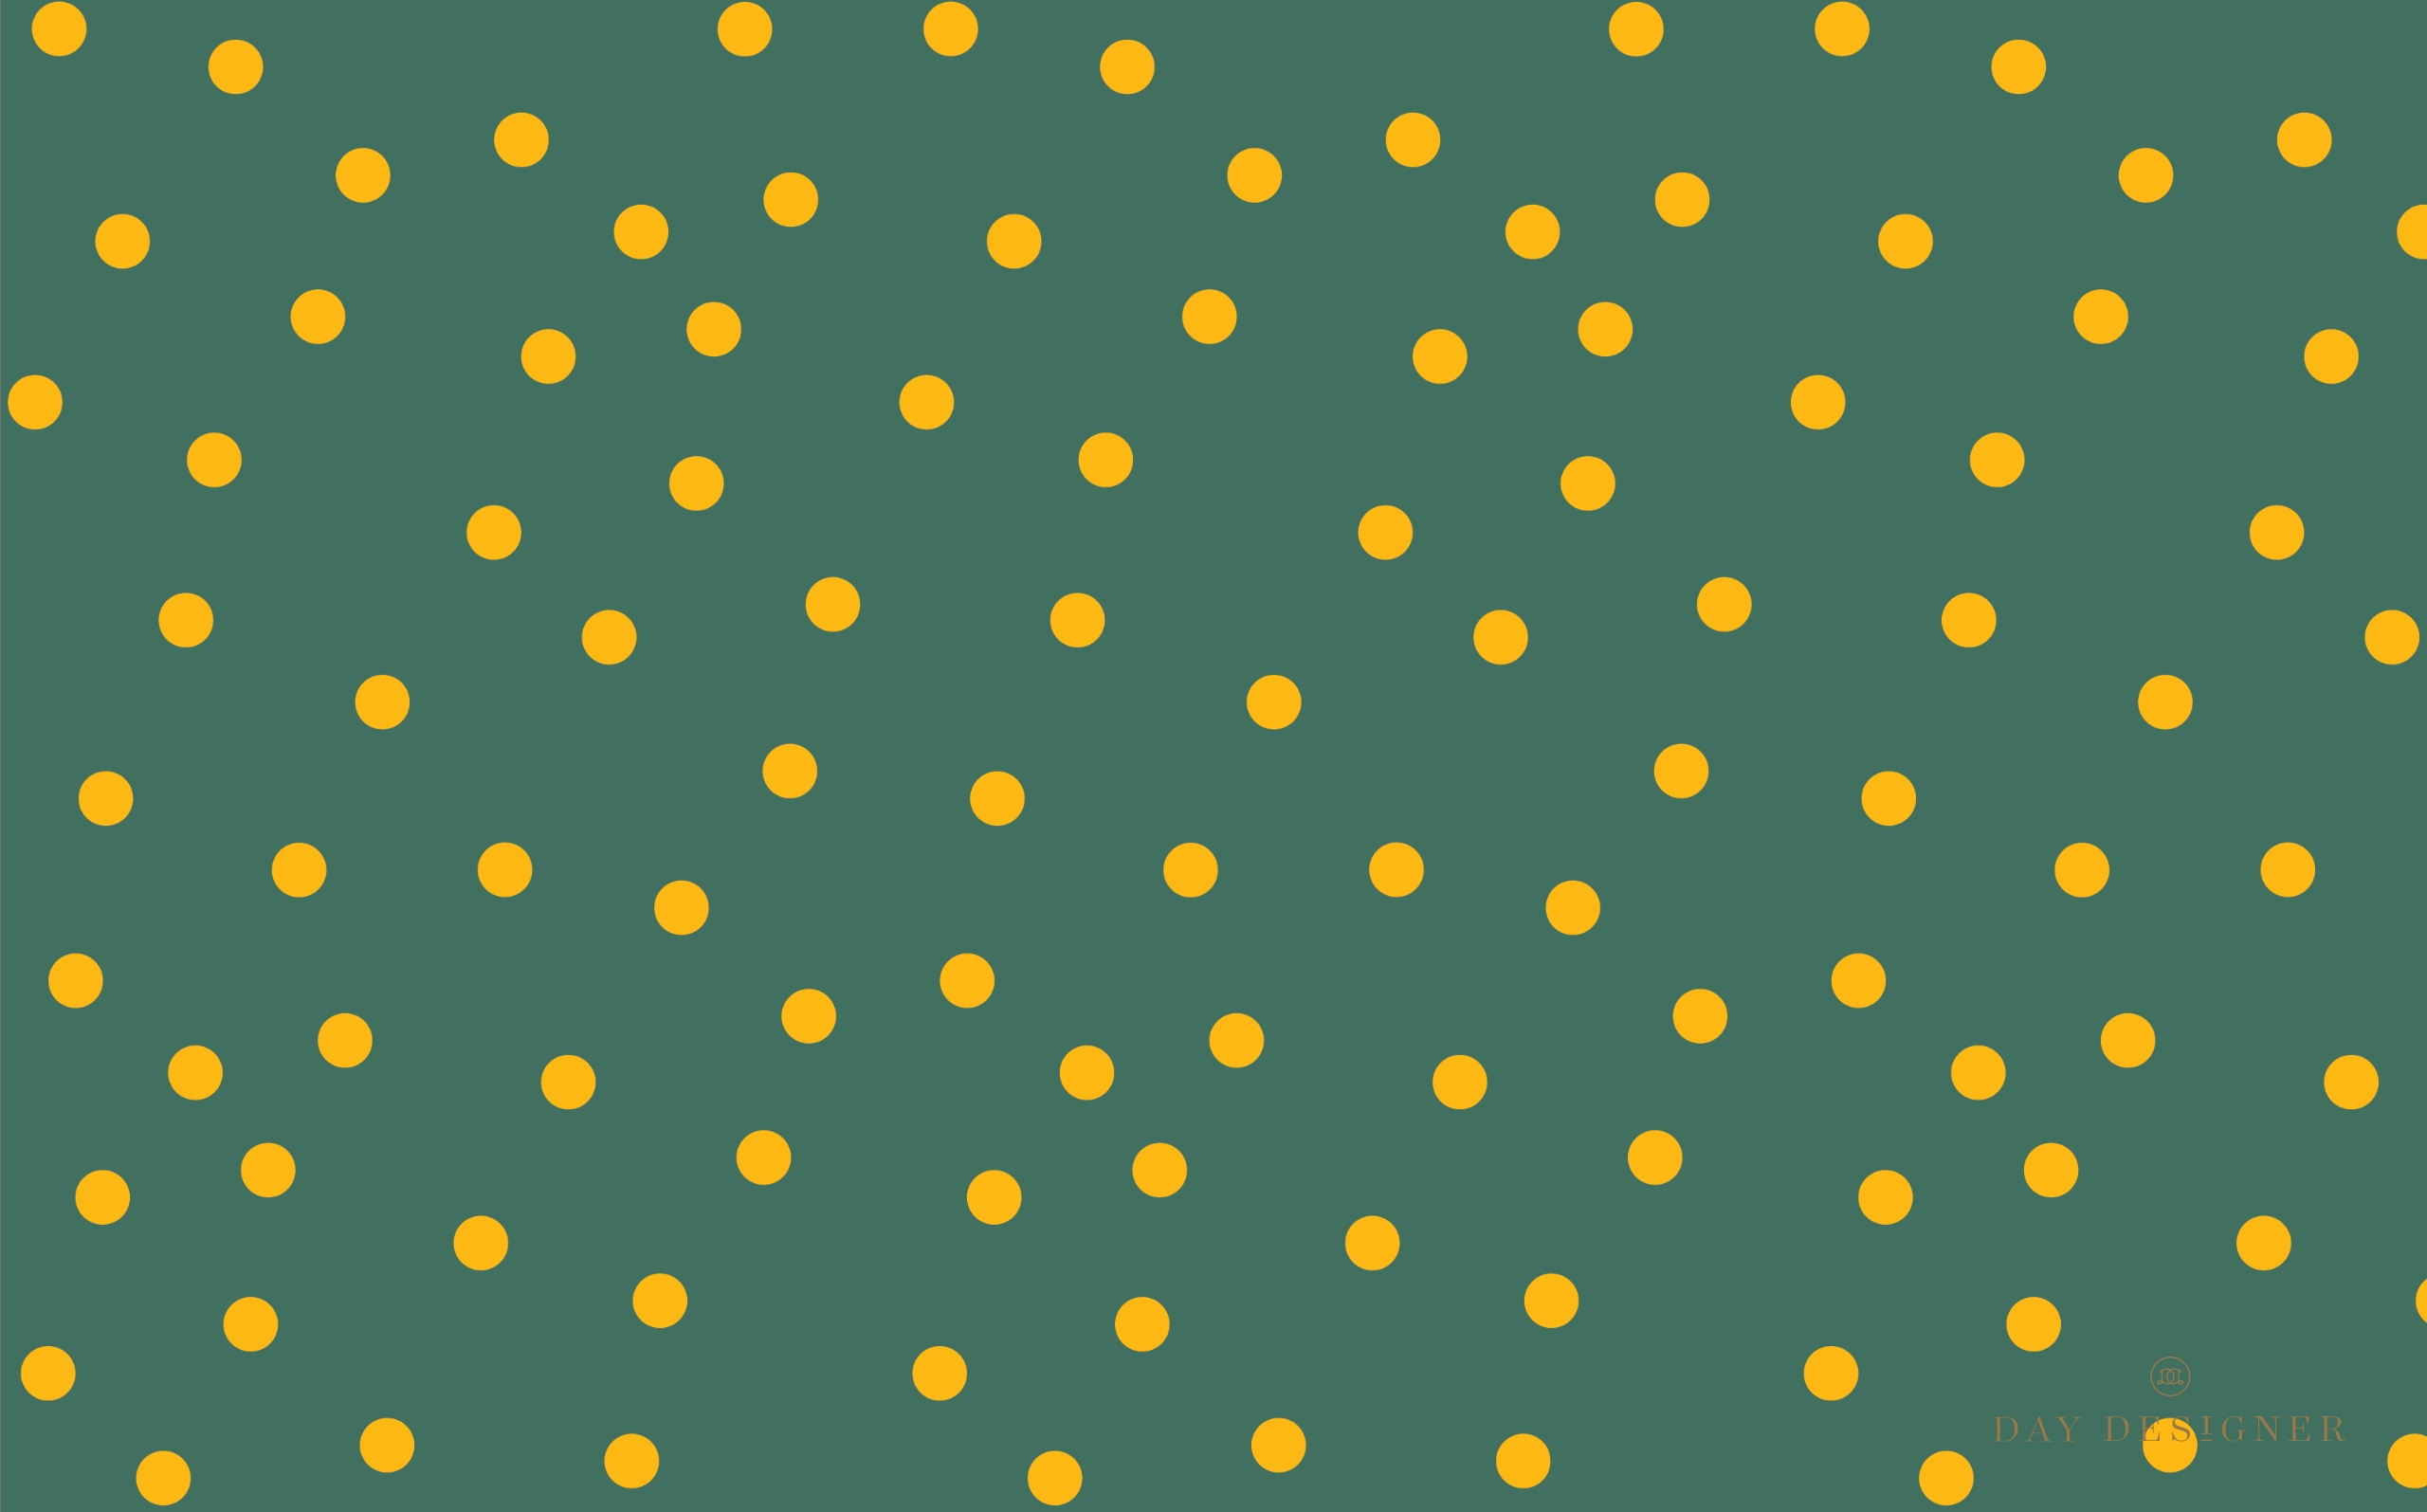 Zoom Background Gold Polka Dots on a Green Background